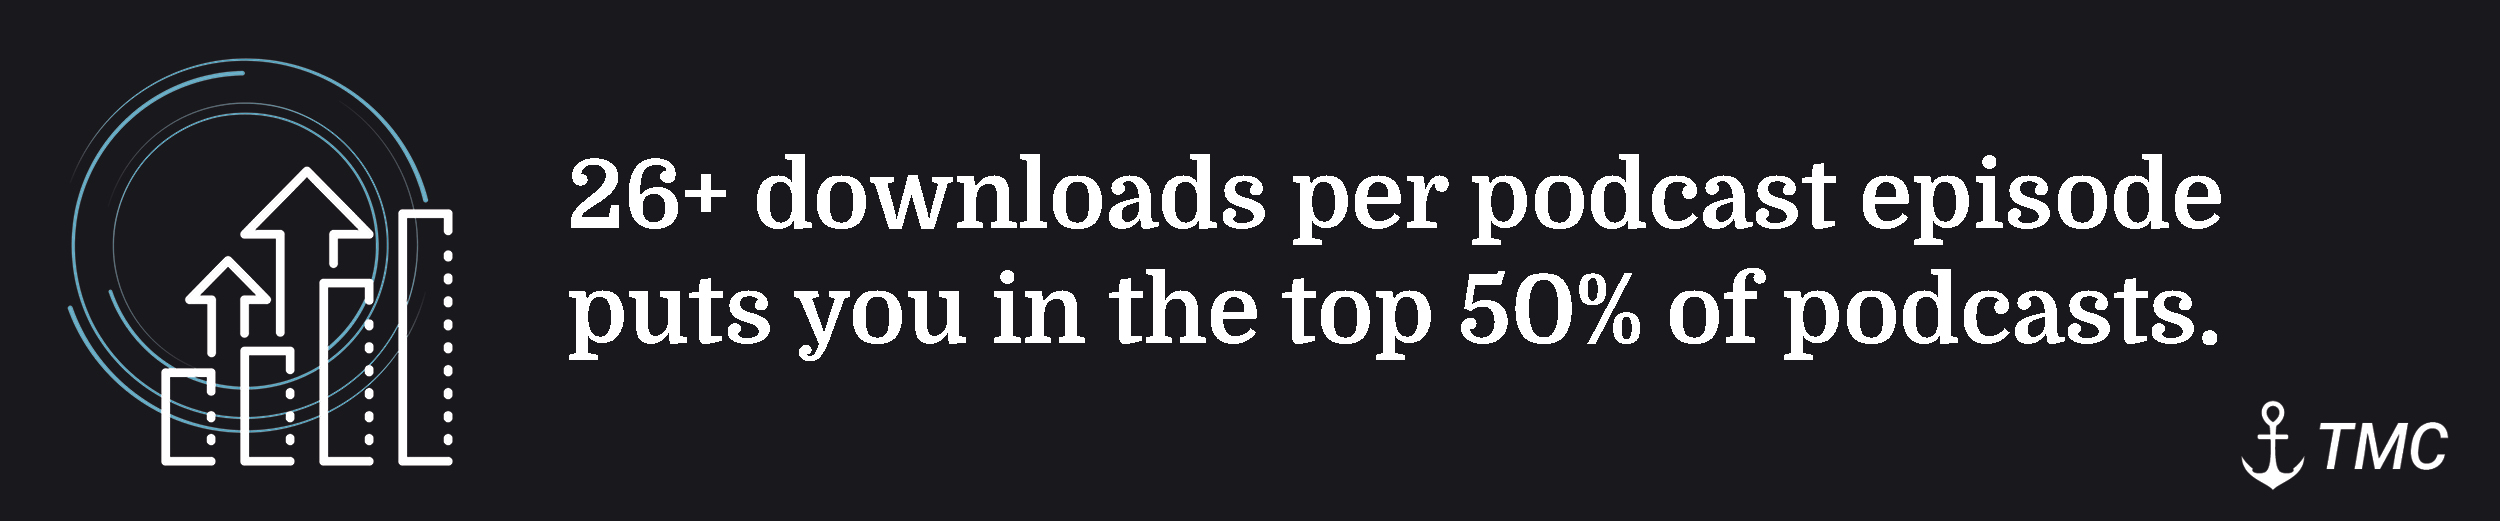 Average amount of downloads on podcast